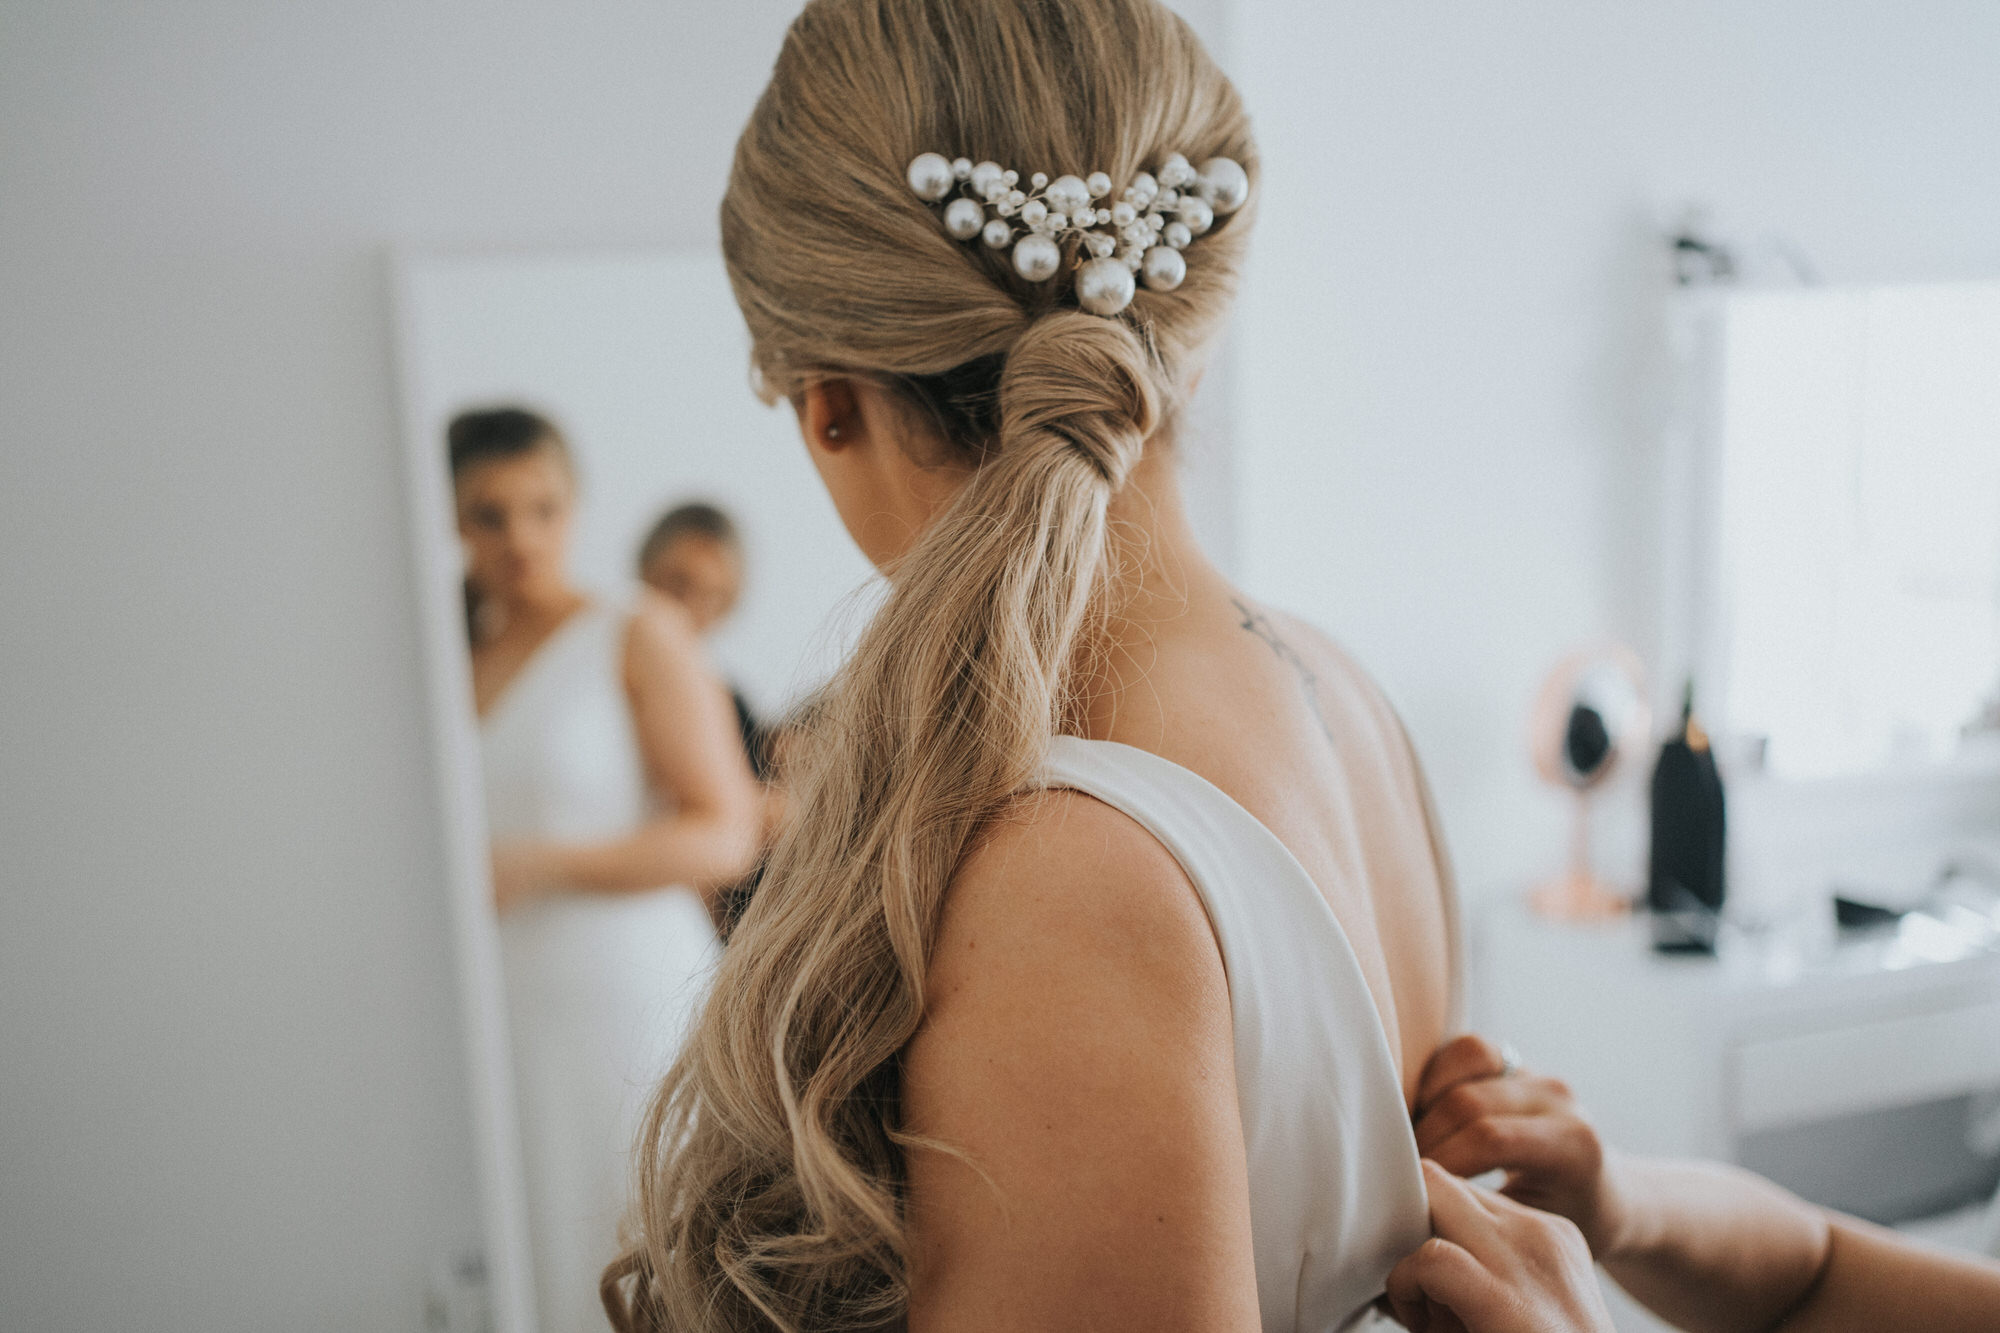 The bride looks at herself in the mirror